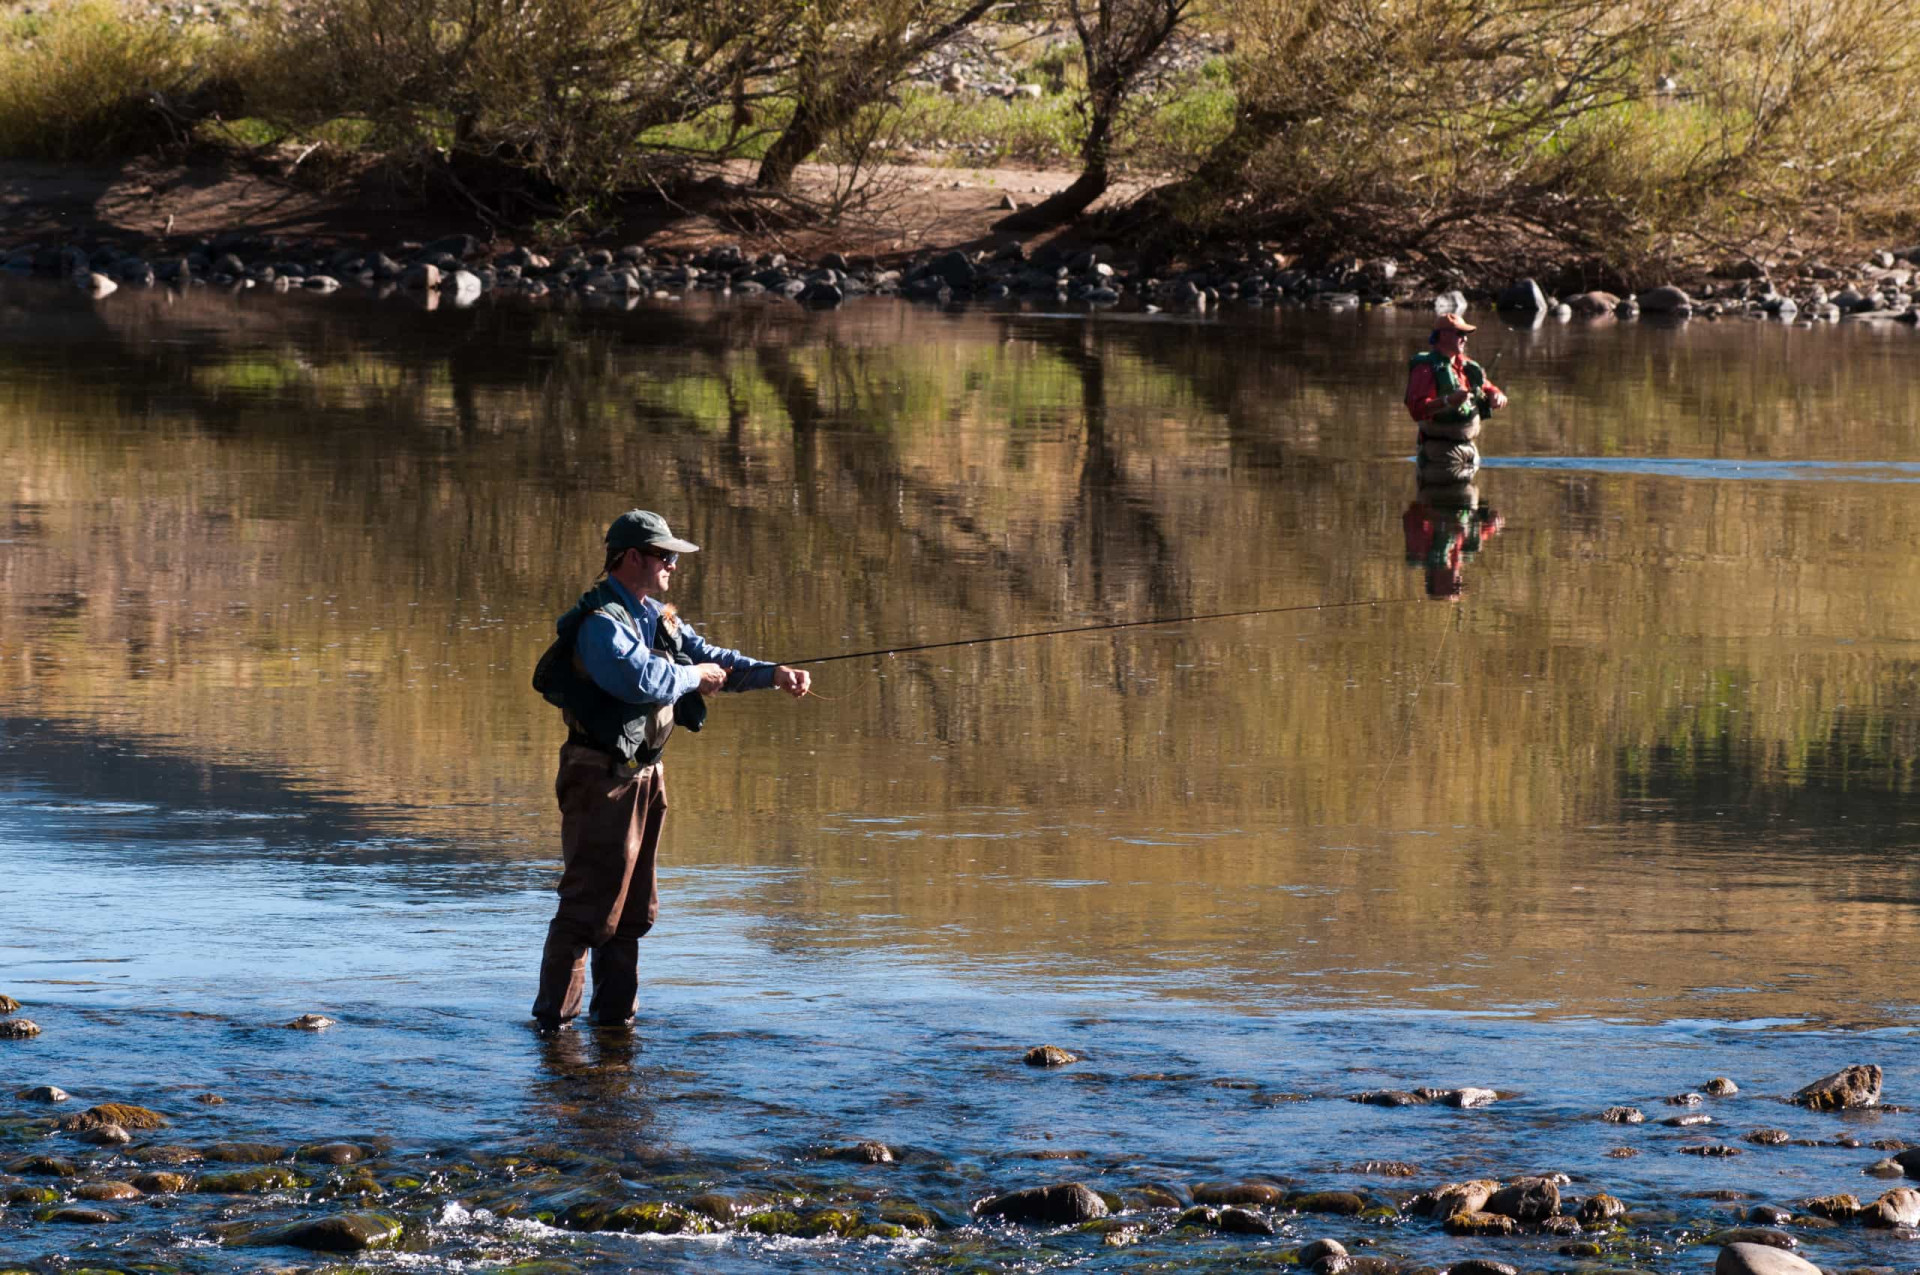 One of the best activities you can do in Patagonia is fishing. In crystal clear water you can fly fish a variety of trout and salmon.<p>You may also like:<a href="https://www.starsinsider.com/n/392592?utm_source=msn.com&utm_medium=display&utm_campaign=referral_description&utm_content=463556v2en-us"> Who is Liu Yifei? A closer look at Disney's controversial Mulan</a></p>